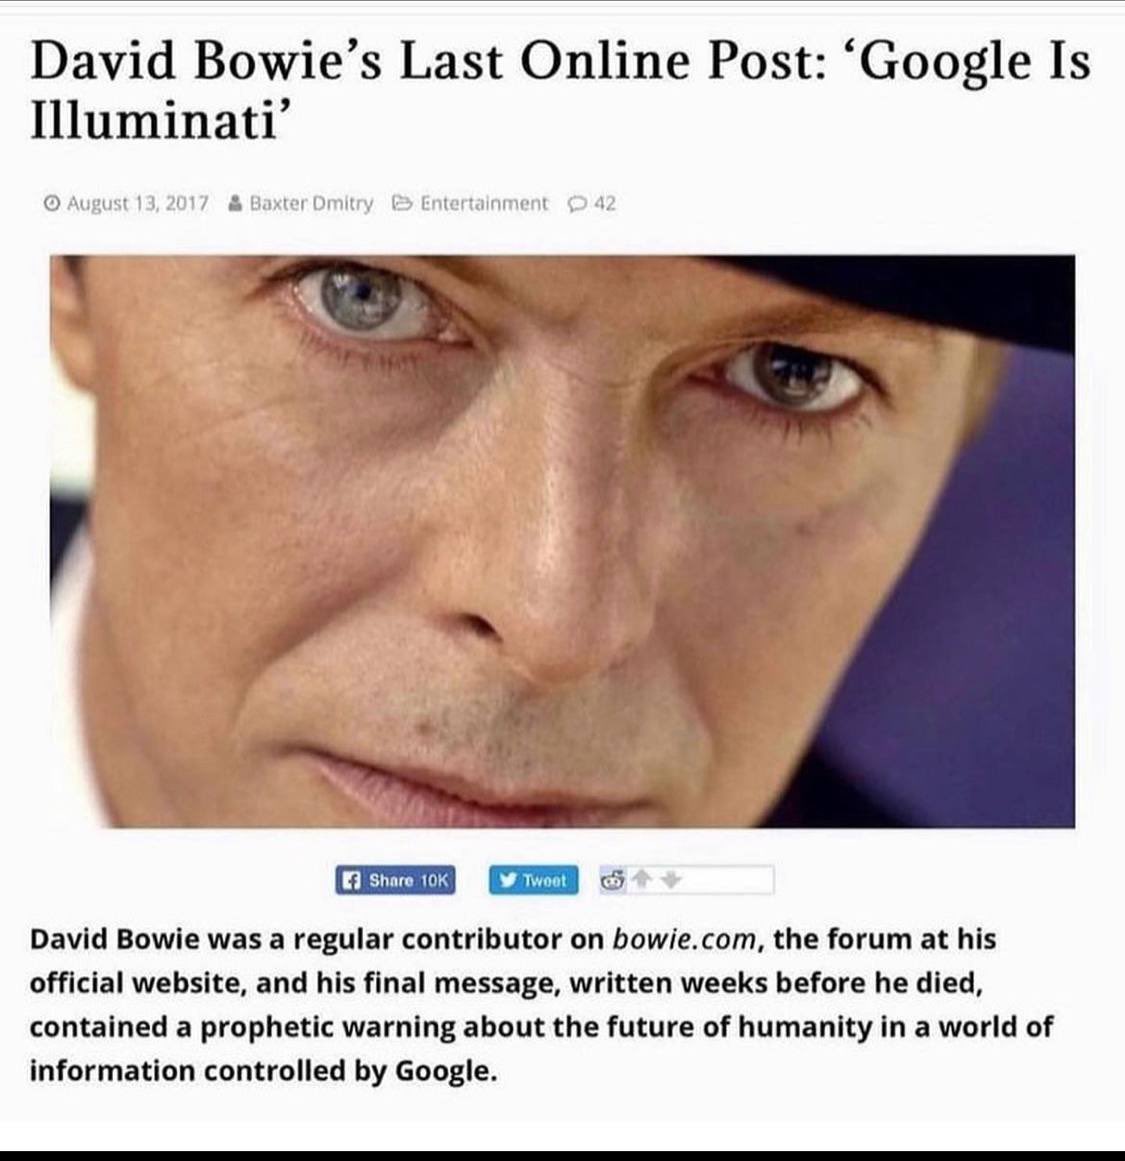 “Google is Illuminati” David Bowie. Bowie is alive. What happened to him to go into witness protection?